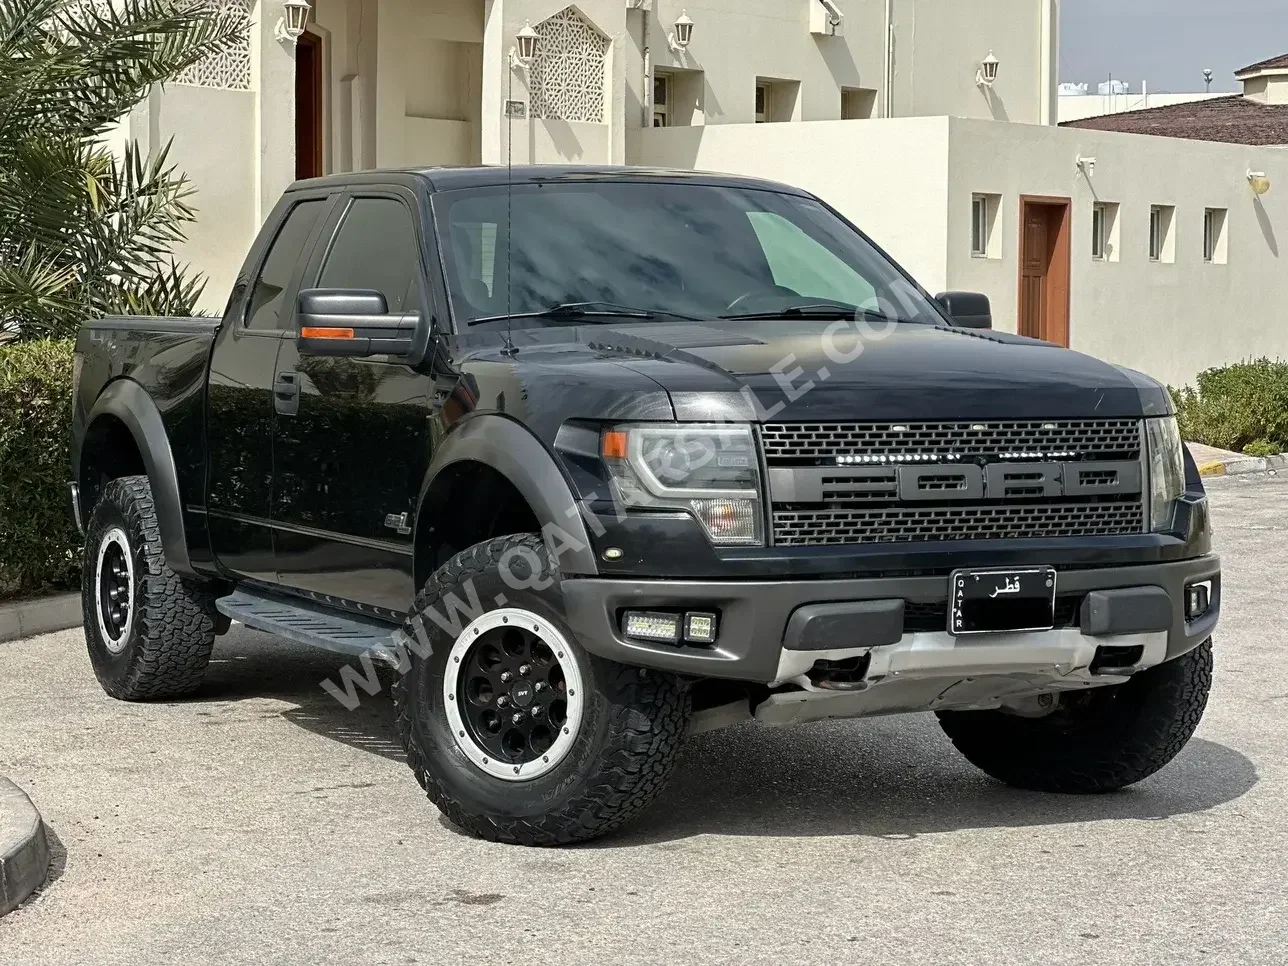 Ford  Raptor  2013  Automatic  238,000 Km  8 Cylinder  Four Wheel Drive (4WD)  Pick Up  Black